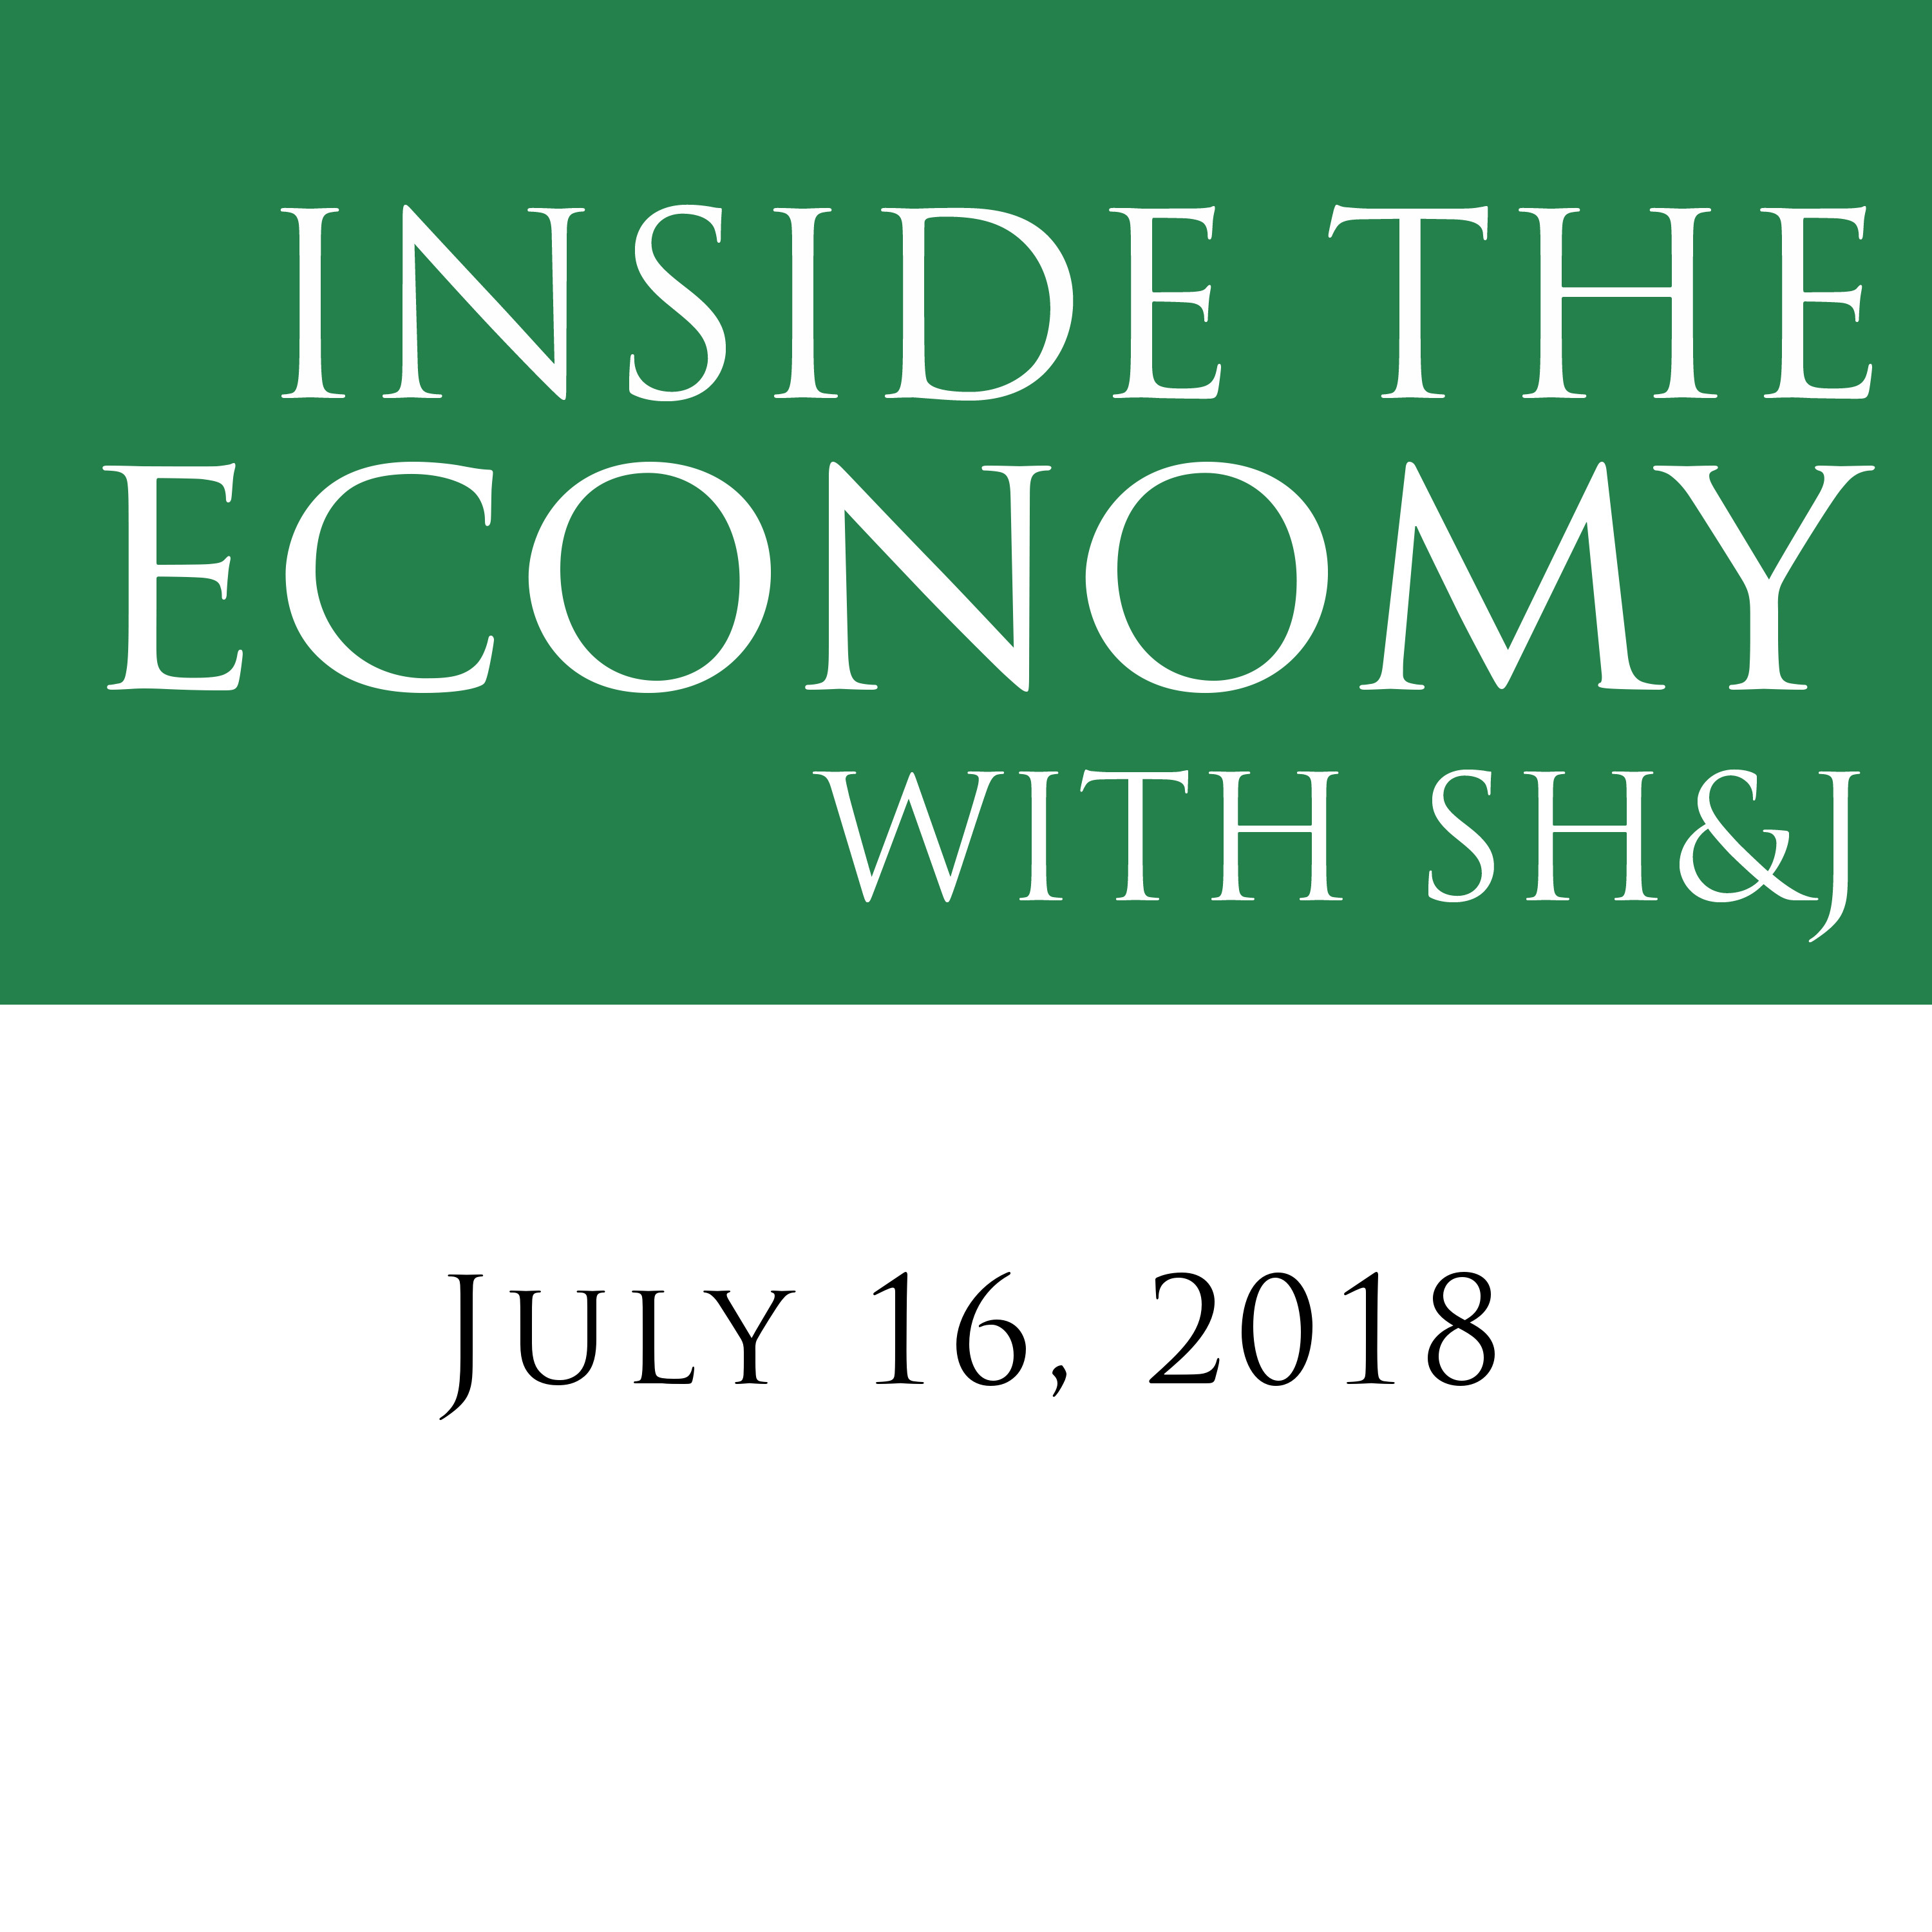 Inside the Economy w/ SH&J: Inflation, Tariffs, the Stock Market and More